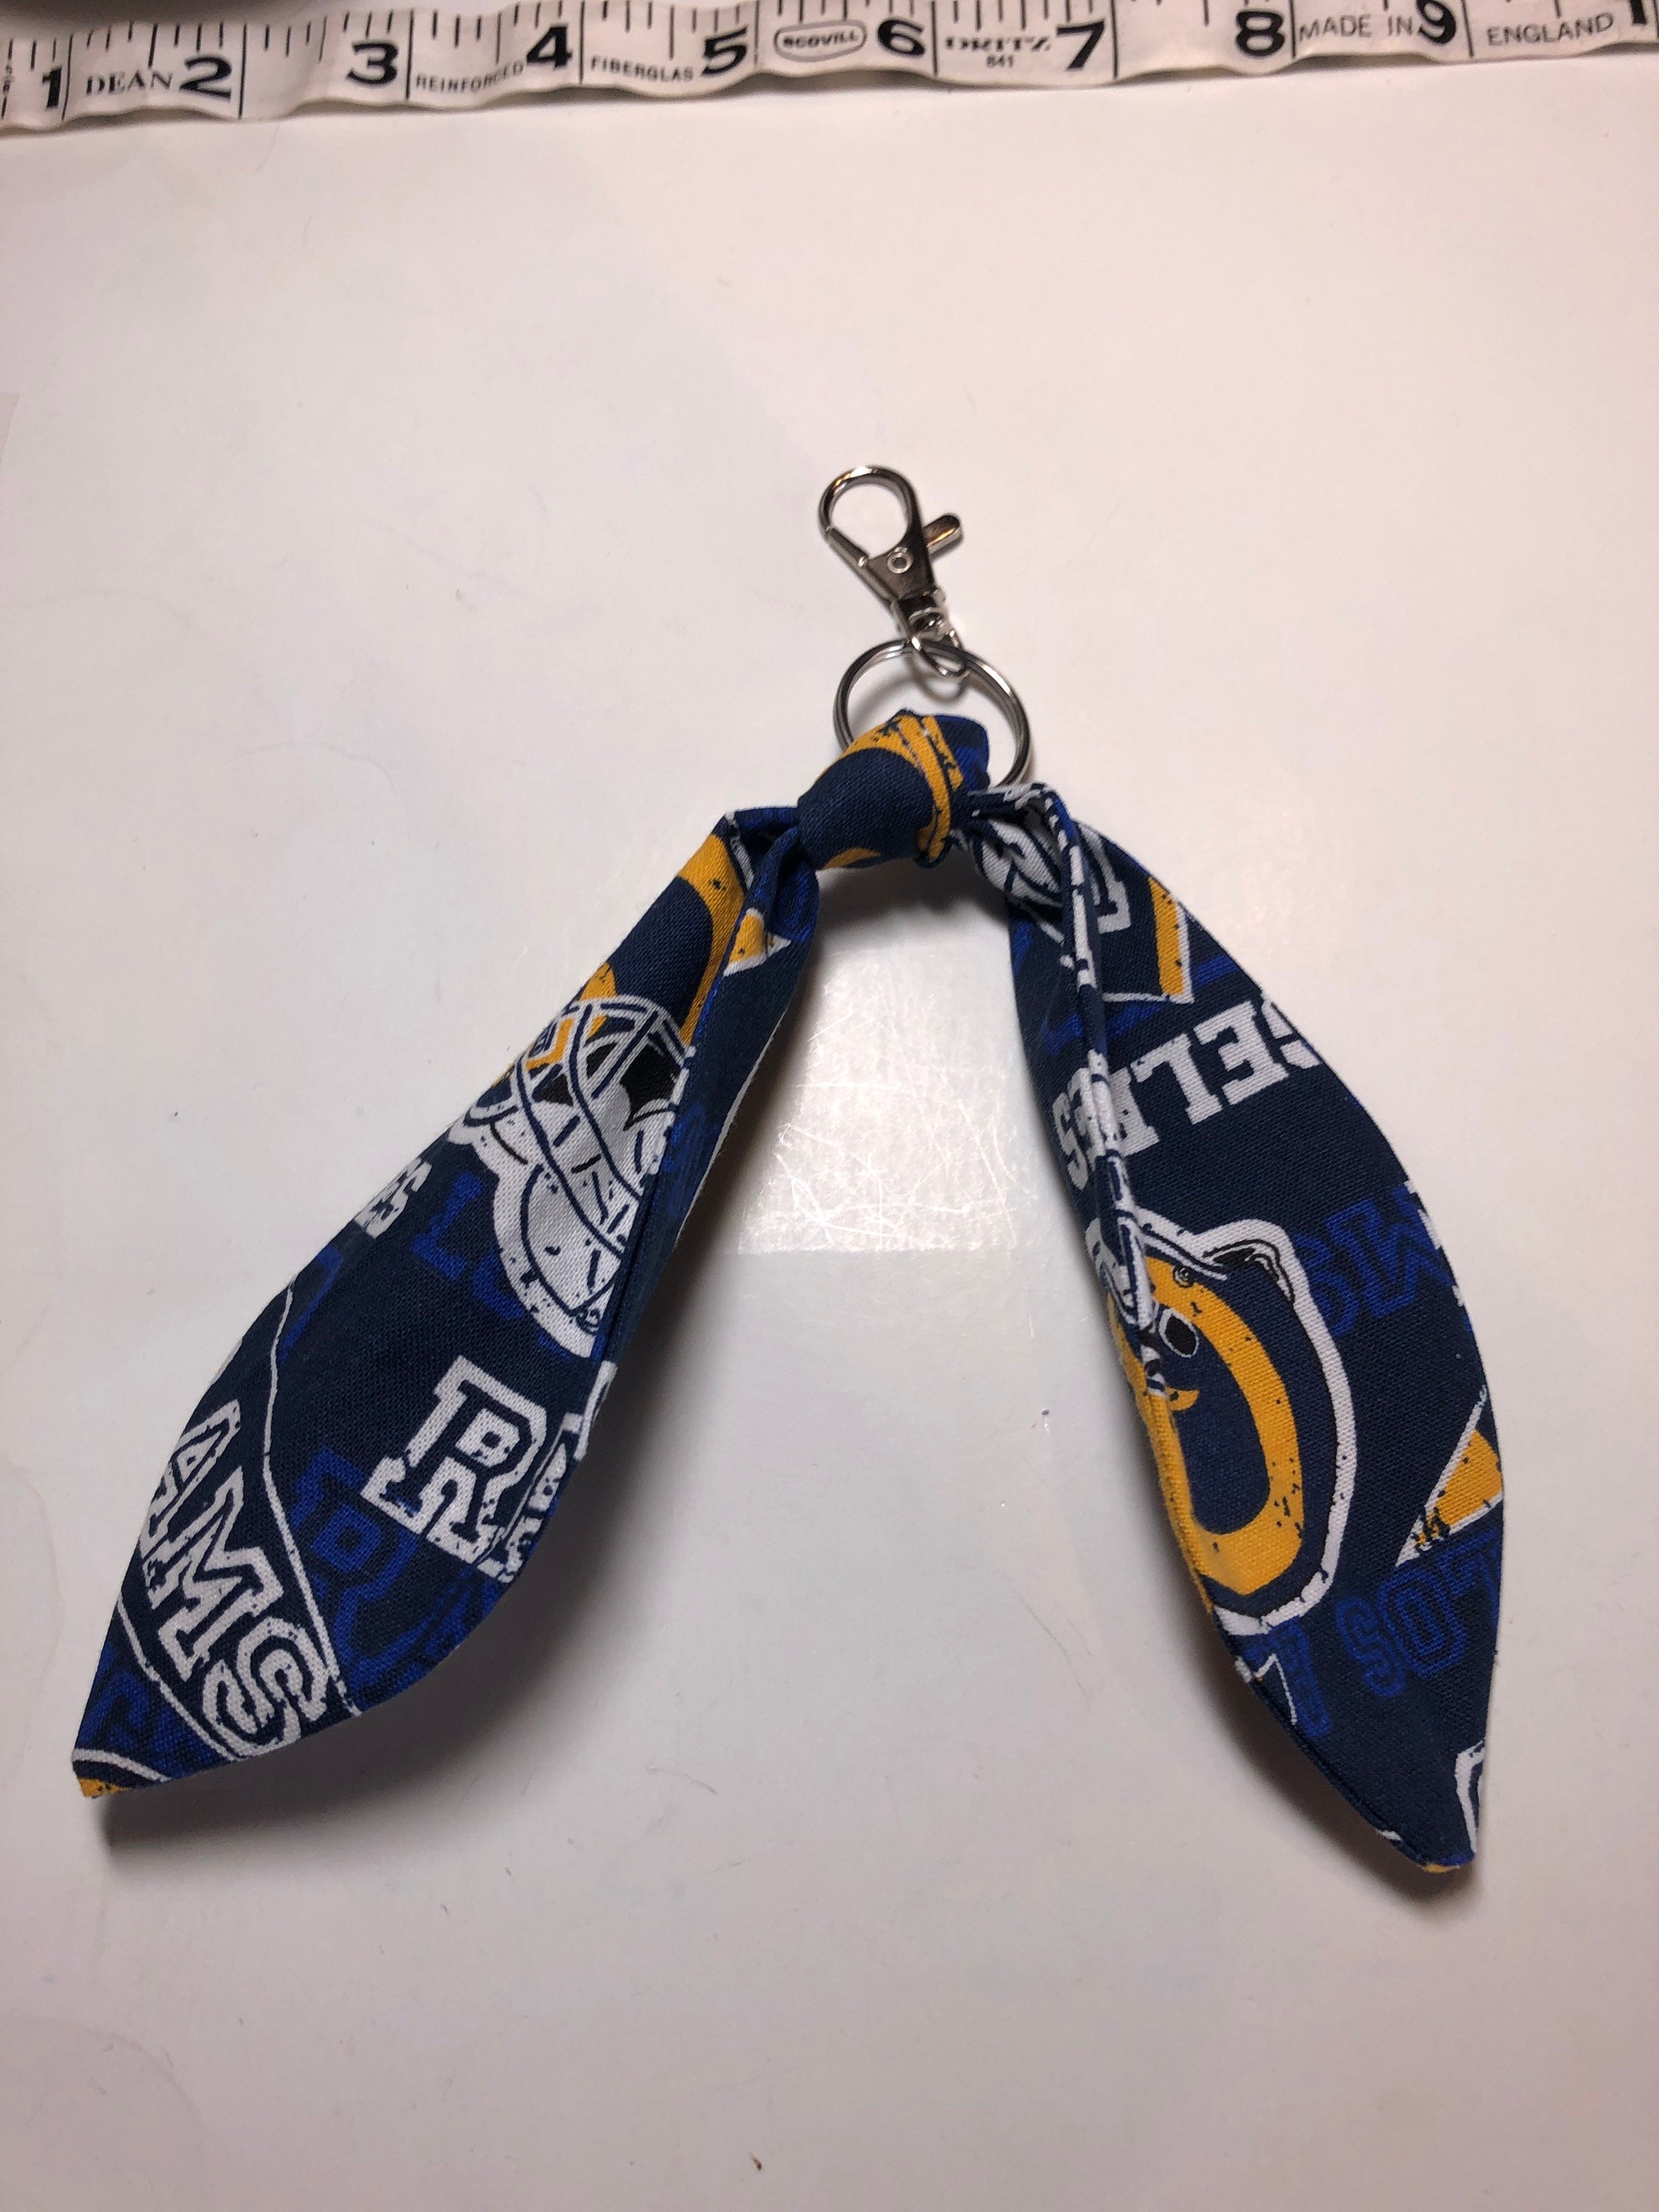 St. Louis Rams Key Chain with clip Keychain NFL - Sunset Key Chains